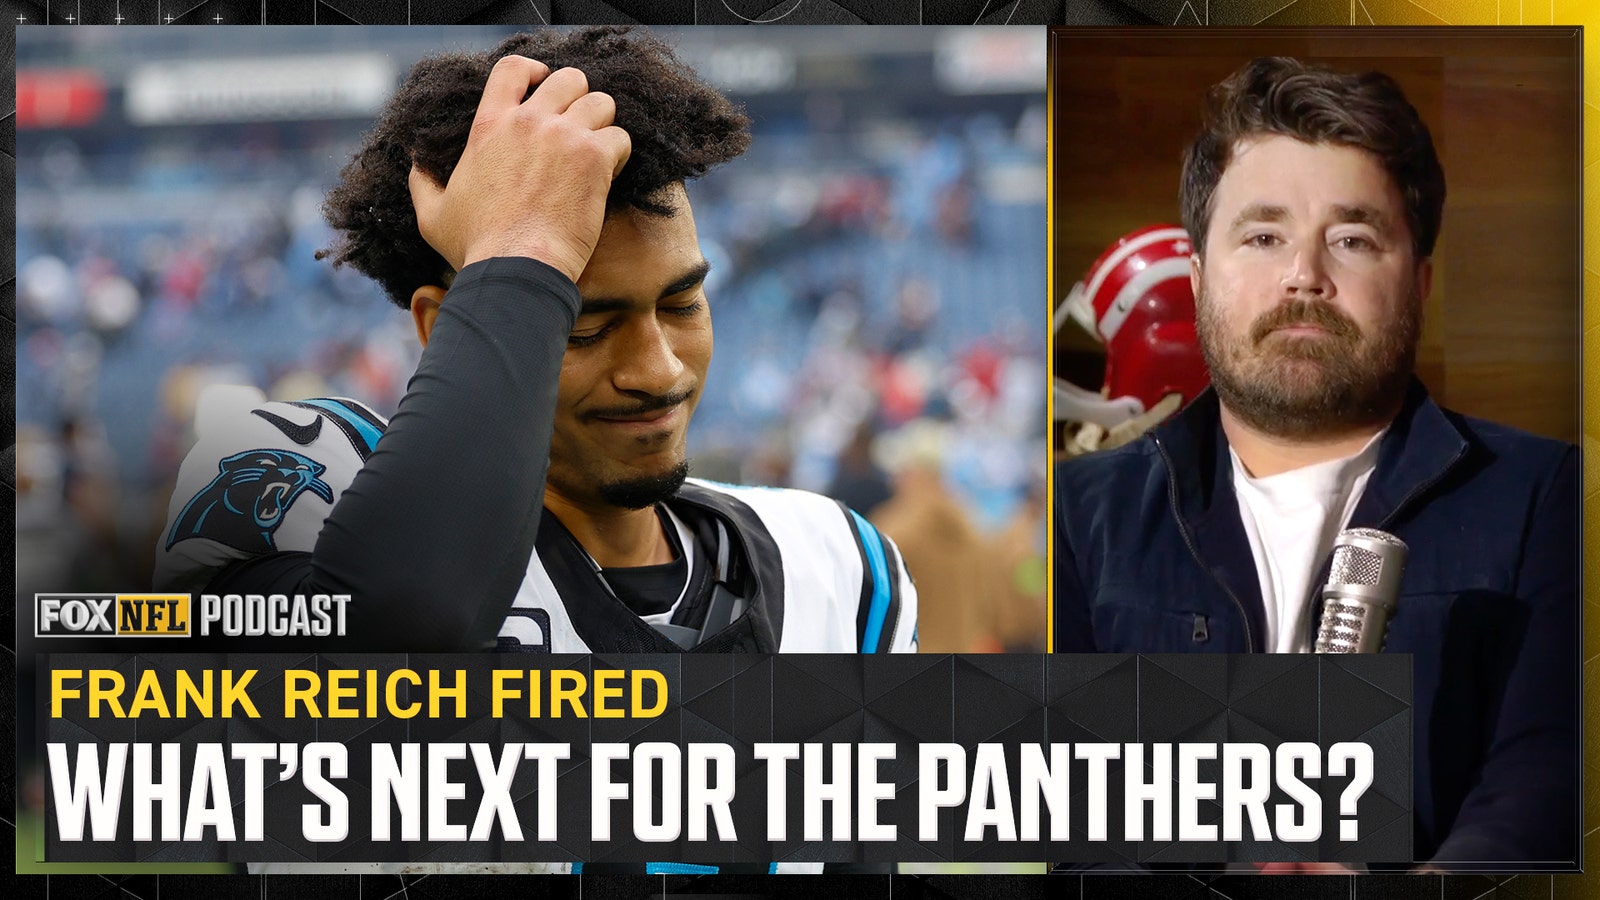 Where do Bryce Young, Panthers go after Frank Reich's firing? 